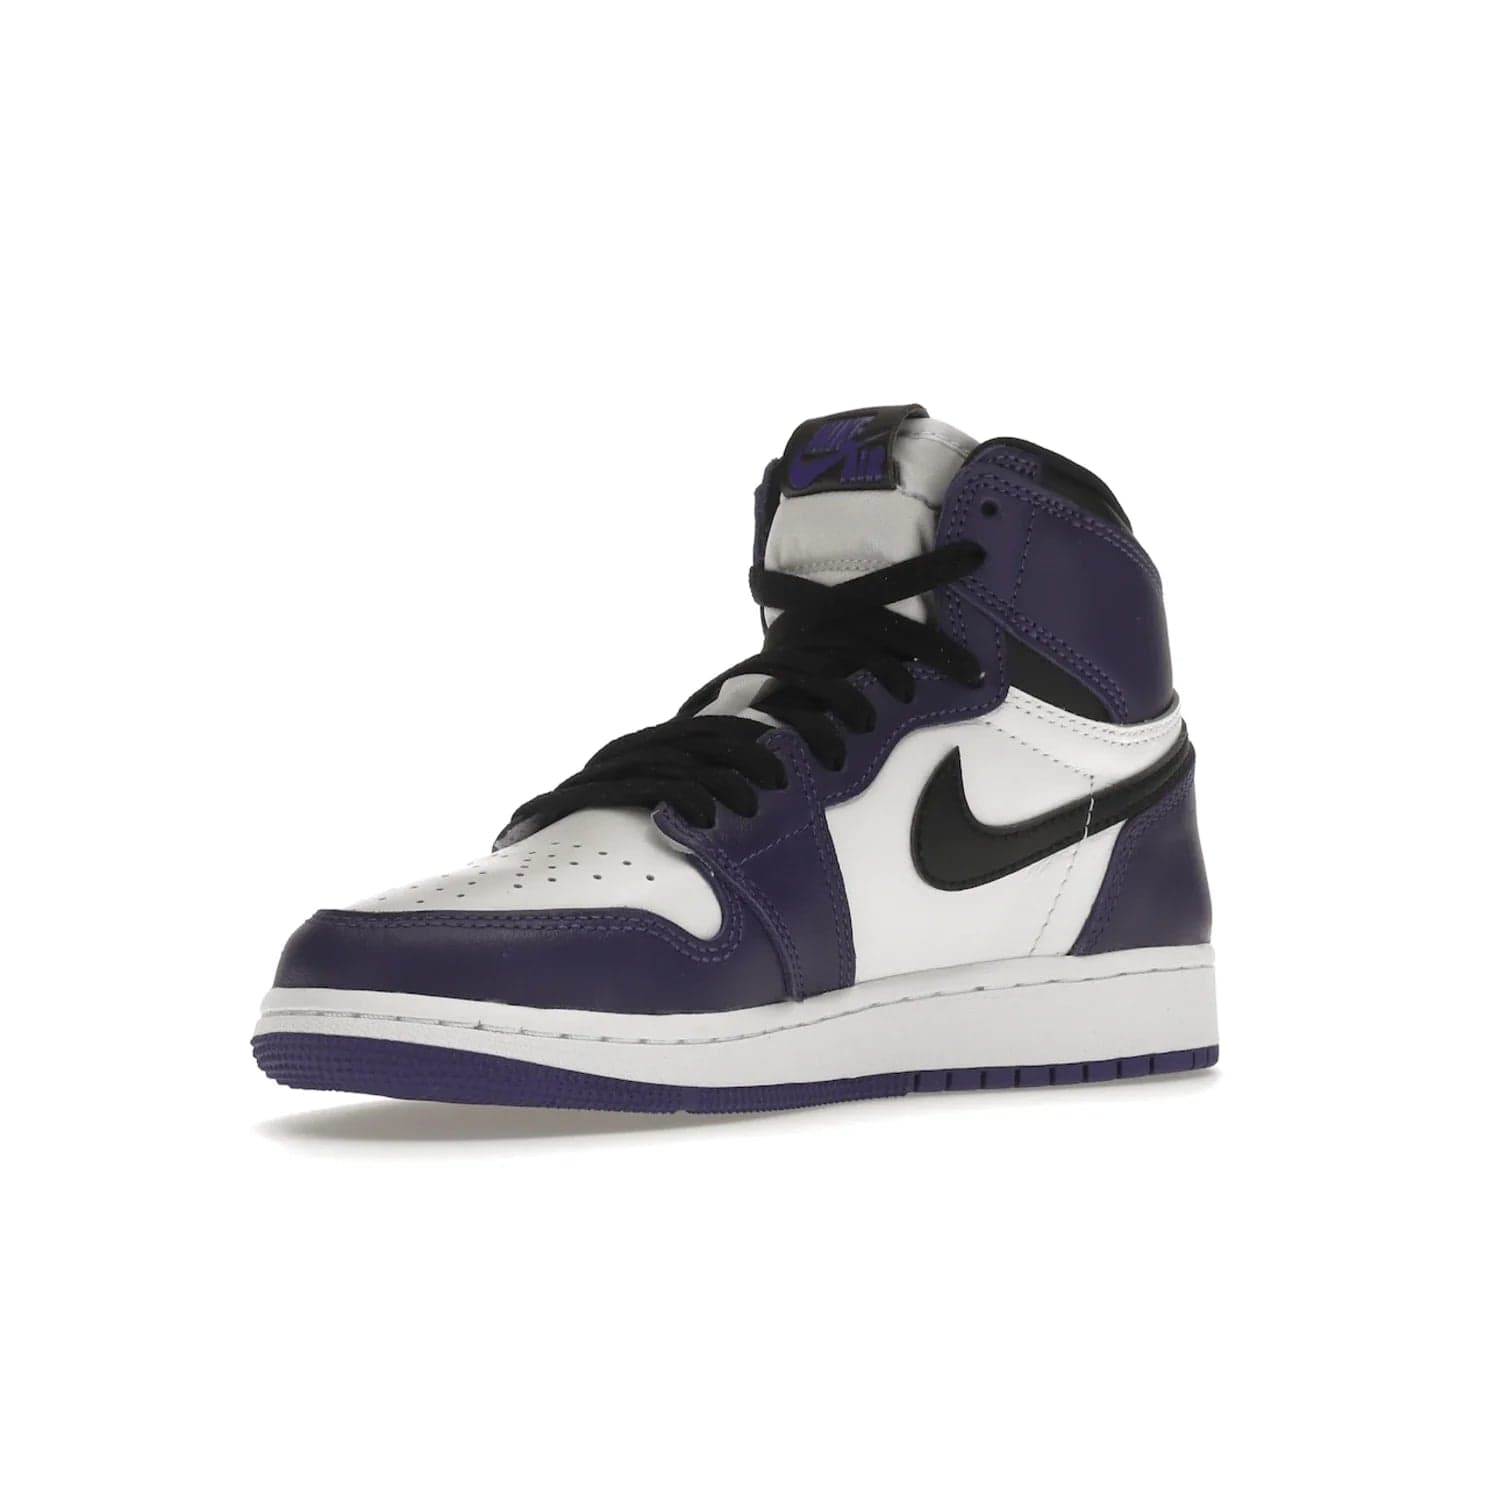 Jordan 1 Retro High Court Purple White (GS) - Image 15 - Only at www.BallersClubKickz.com - The Air Jordan 1 Retro High Court Purple is here and young sneaker heads can show off classic style. Features a white tumbled leather upper, black swoosh, purple overlays, black collar with purple overlay, white tongue, black patch with purple Nike Air logo and swoosh, white midsole, and purple rubber outsole with circular pattern.